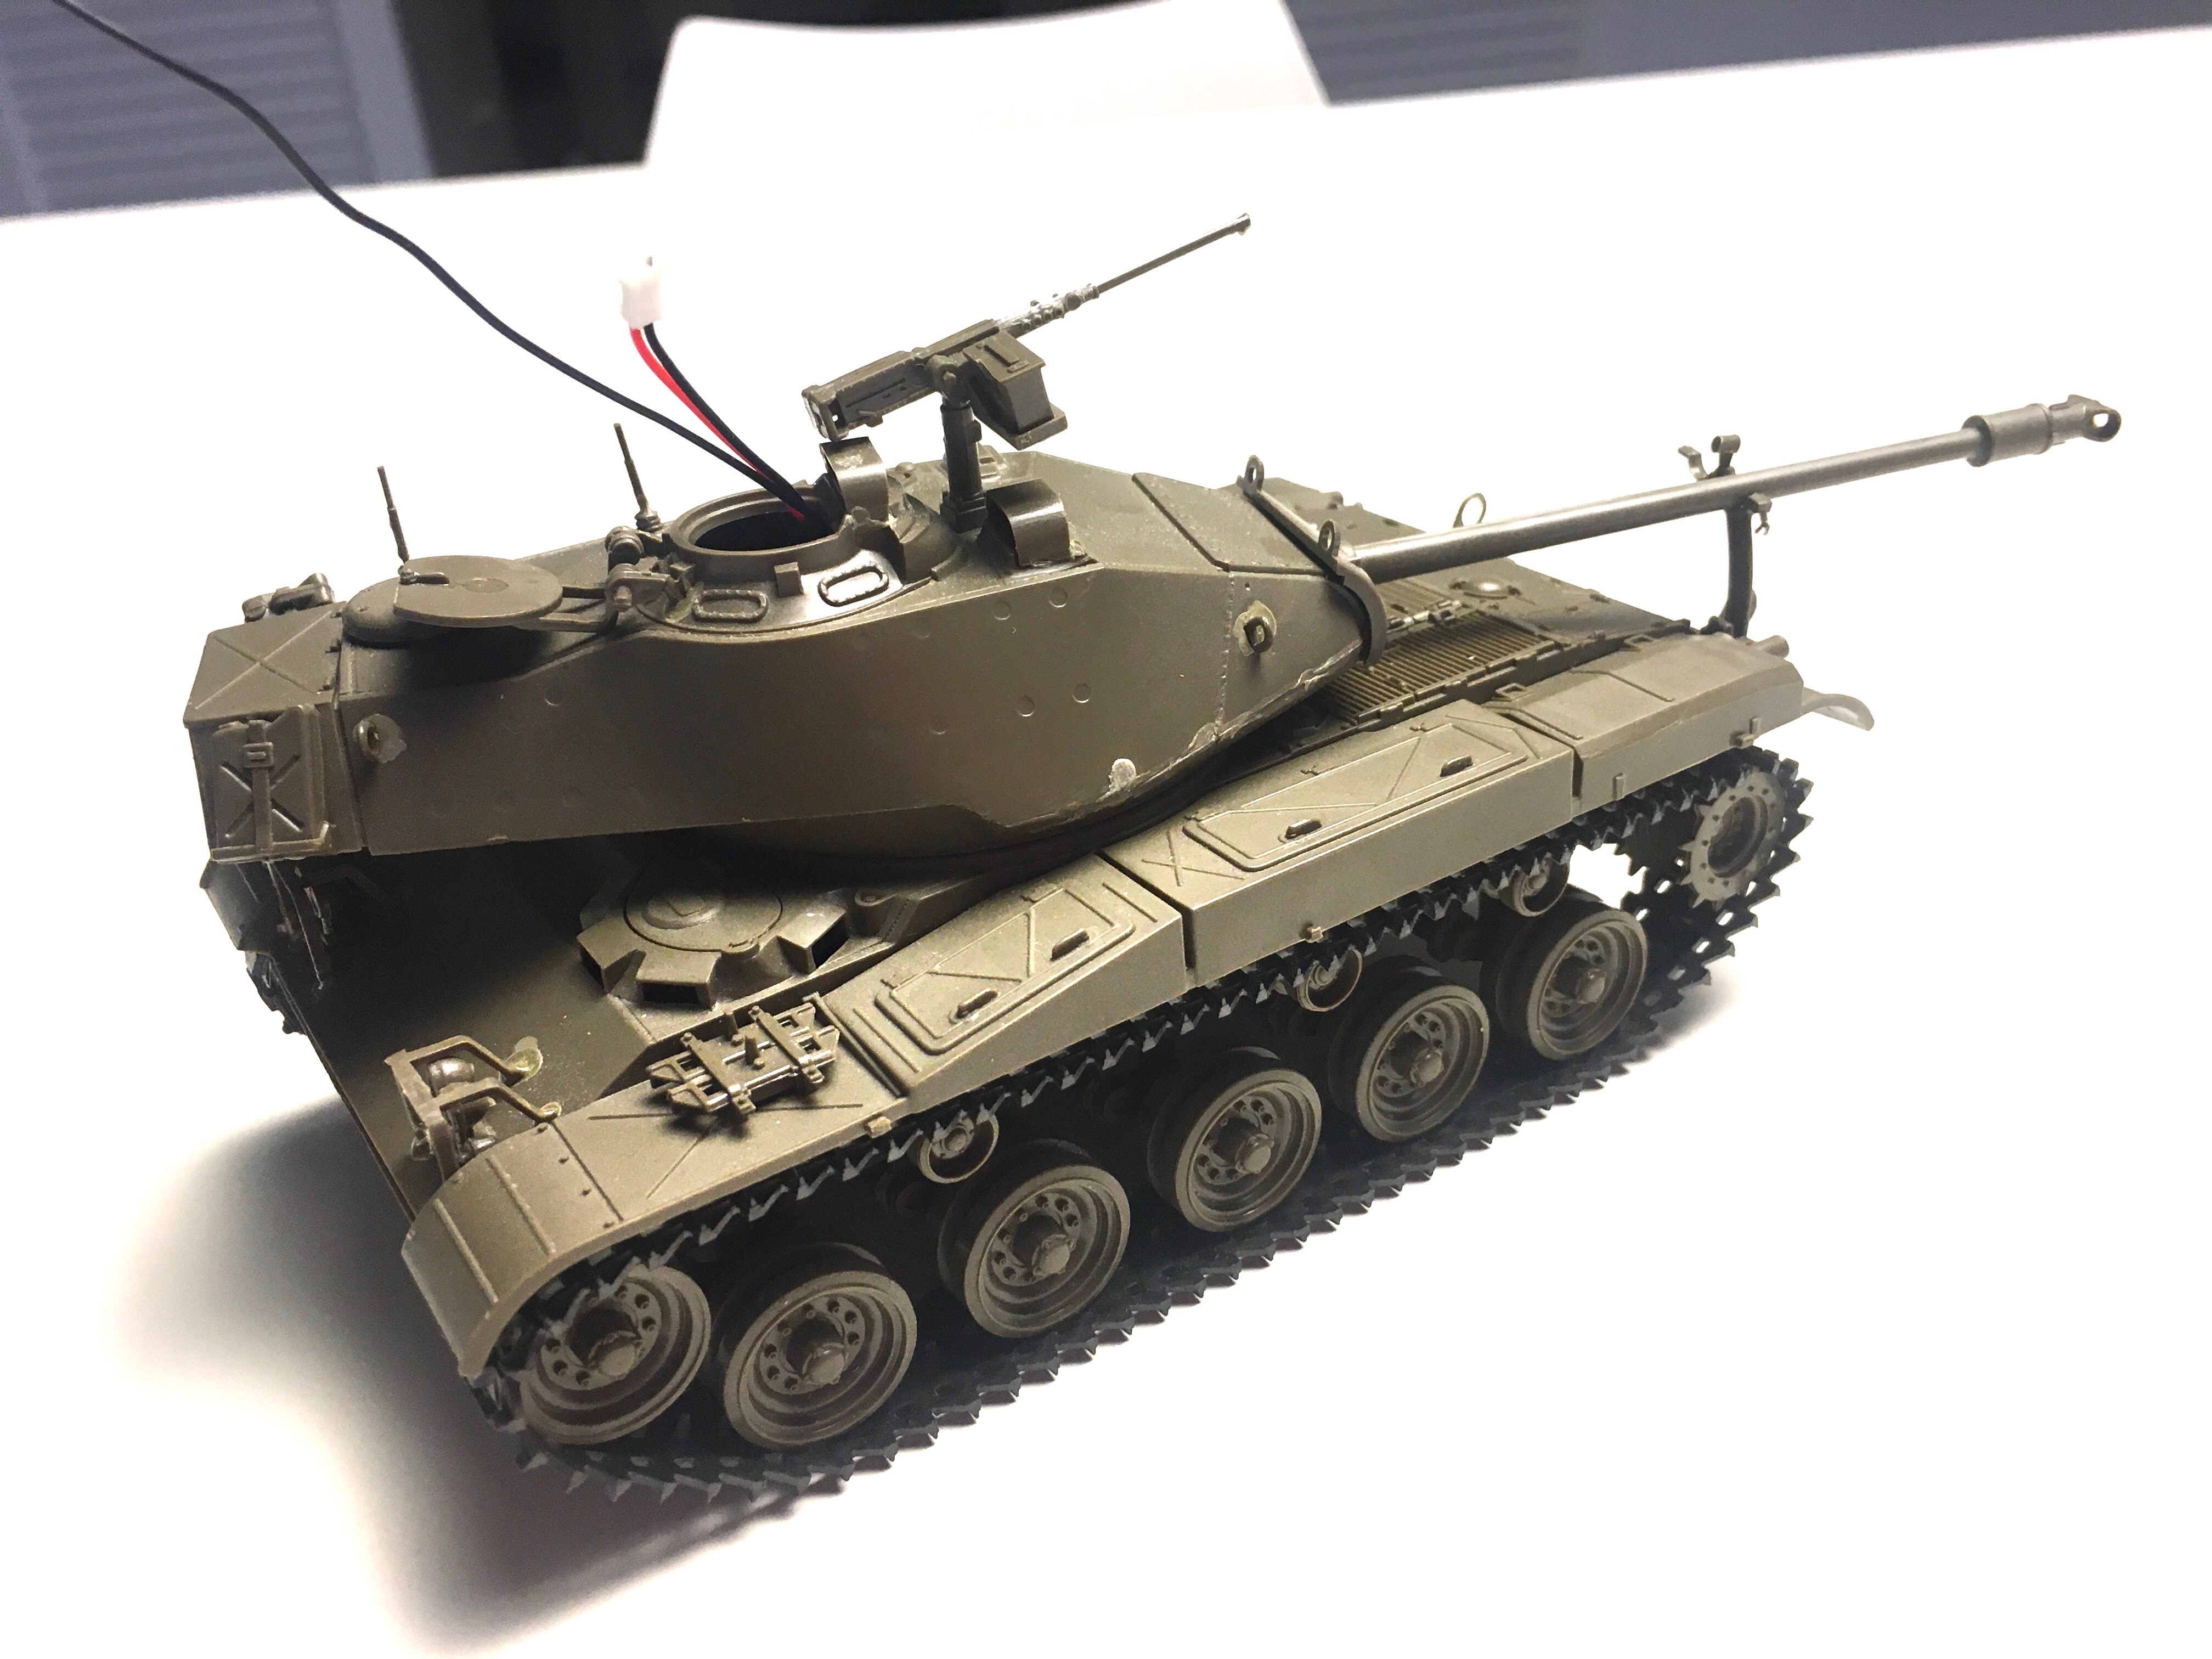 This is a motorized remote control version of the Tamiya M41 Walker Bulldog.